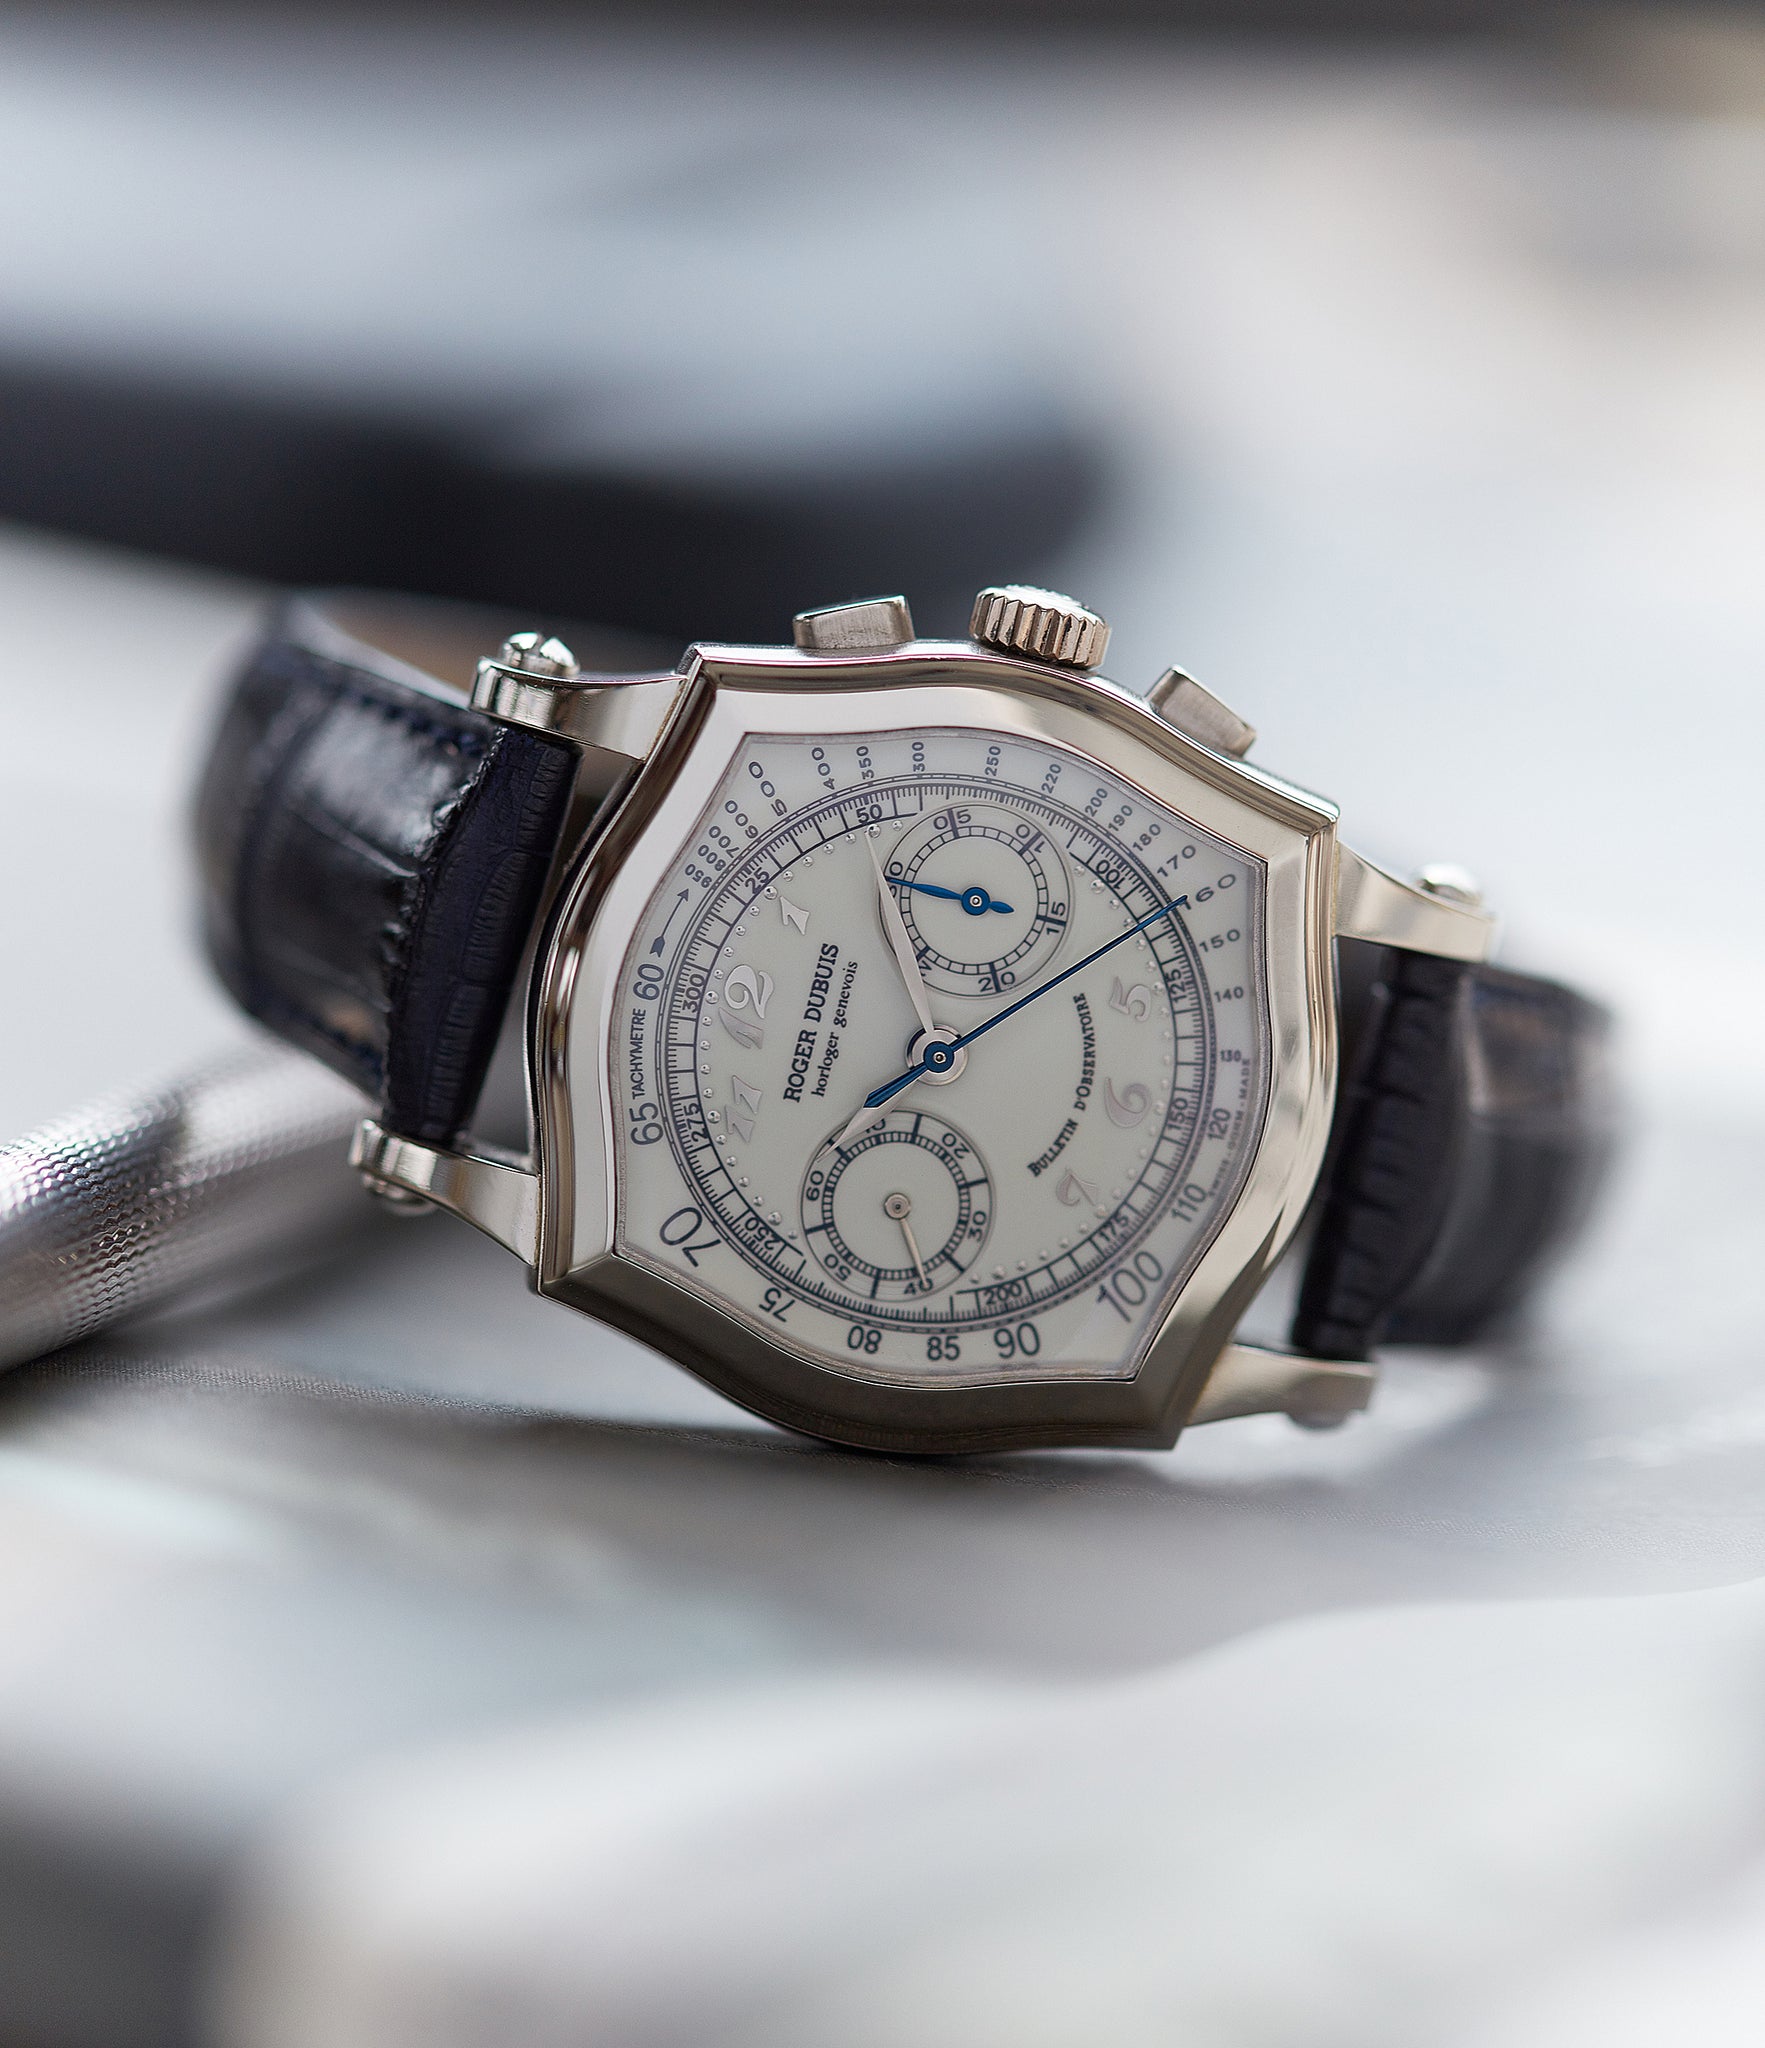 Roger Dubuis Sympathie Chronograph S37 Limited Edition white gold dress watch from independent watchmaker for sale online at A Collected Man London UK specialist of rare watches